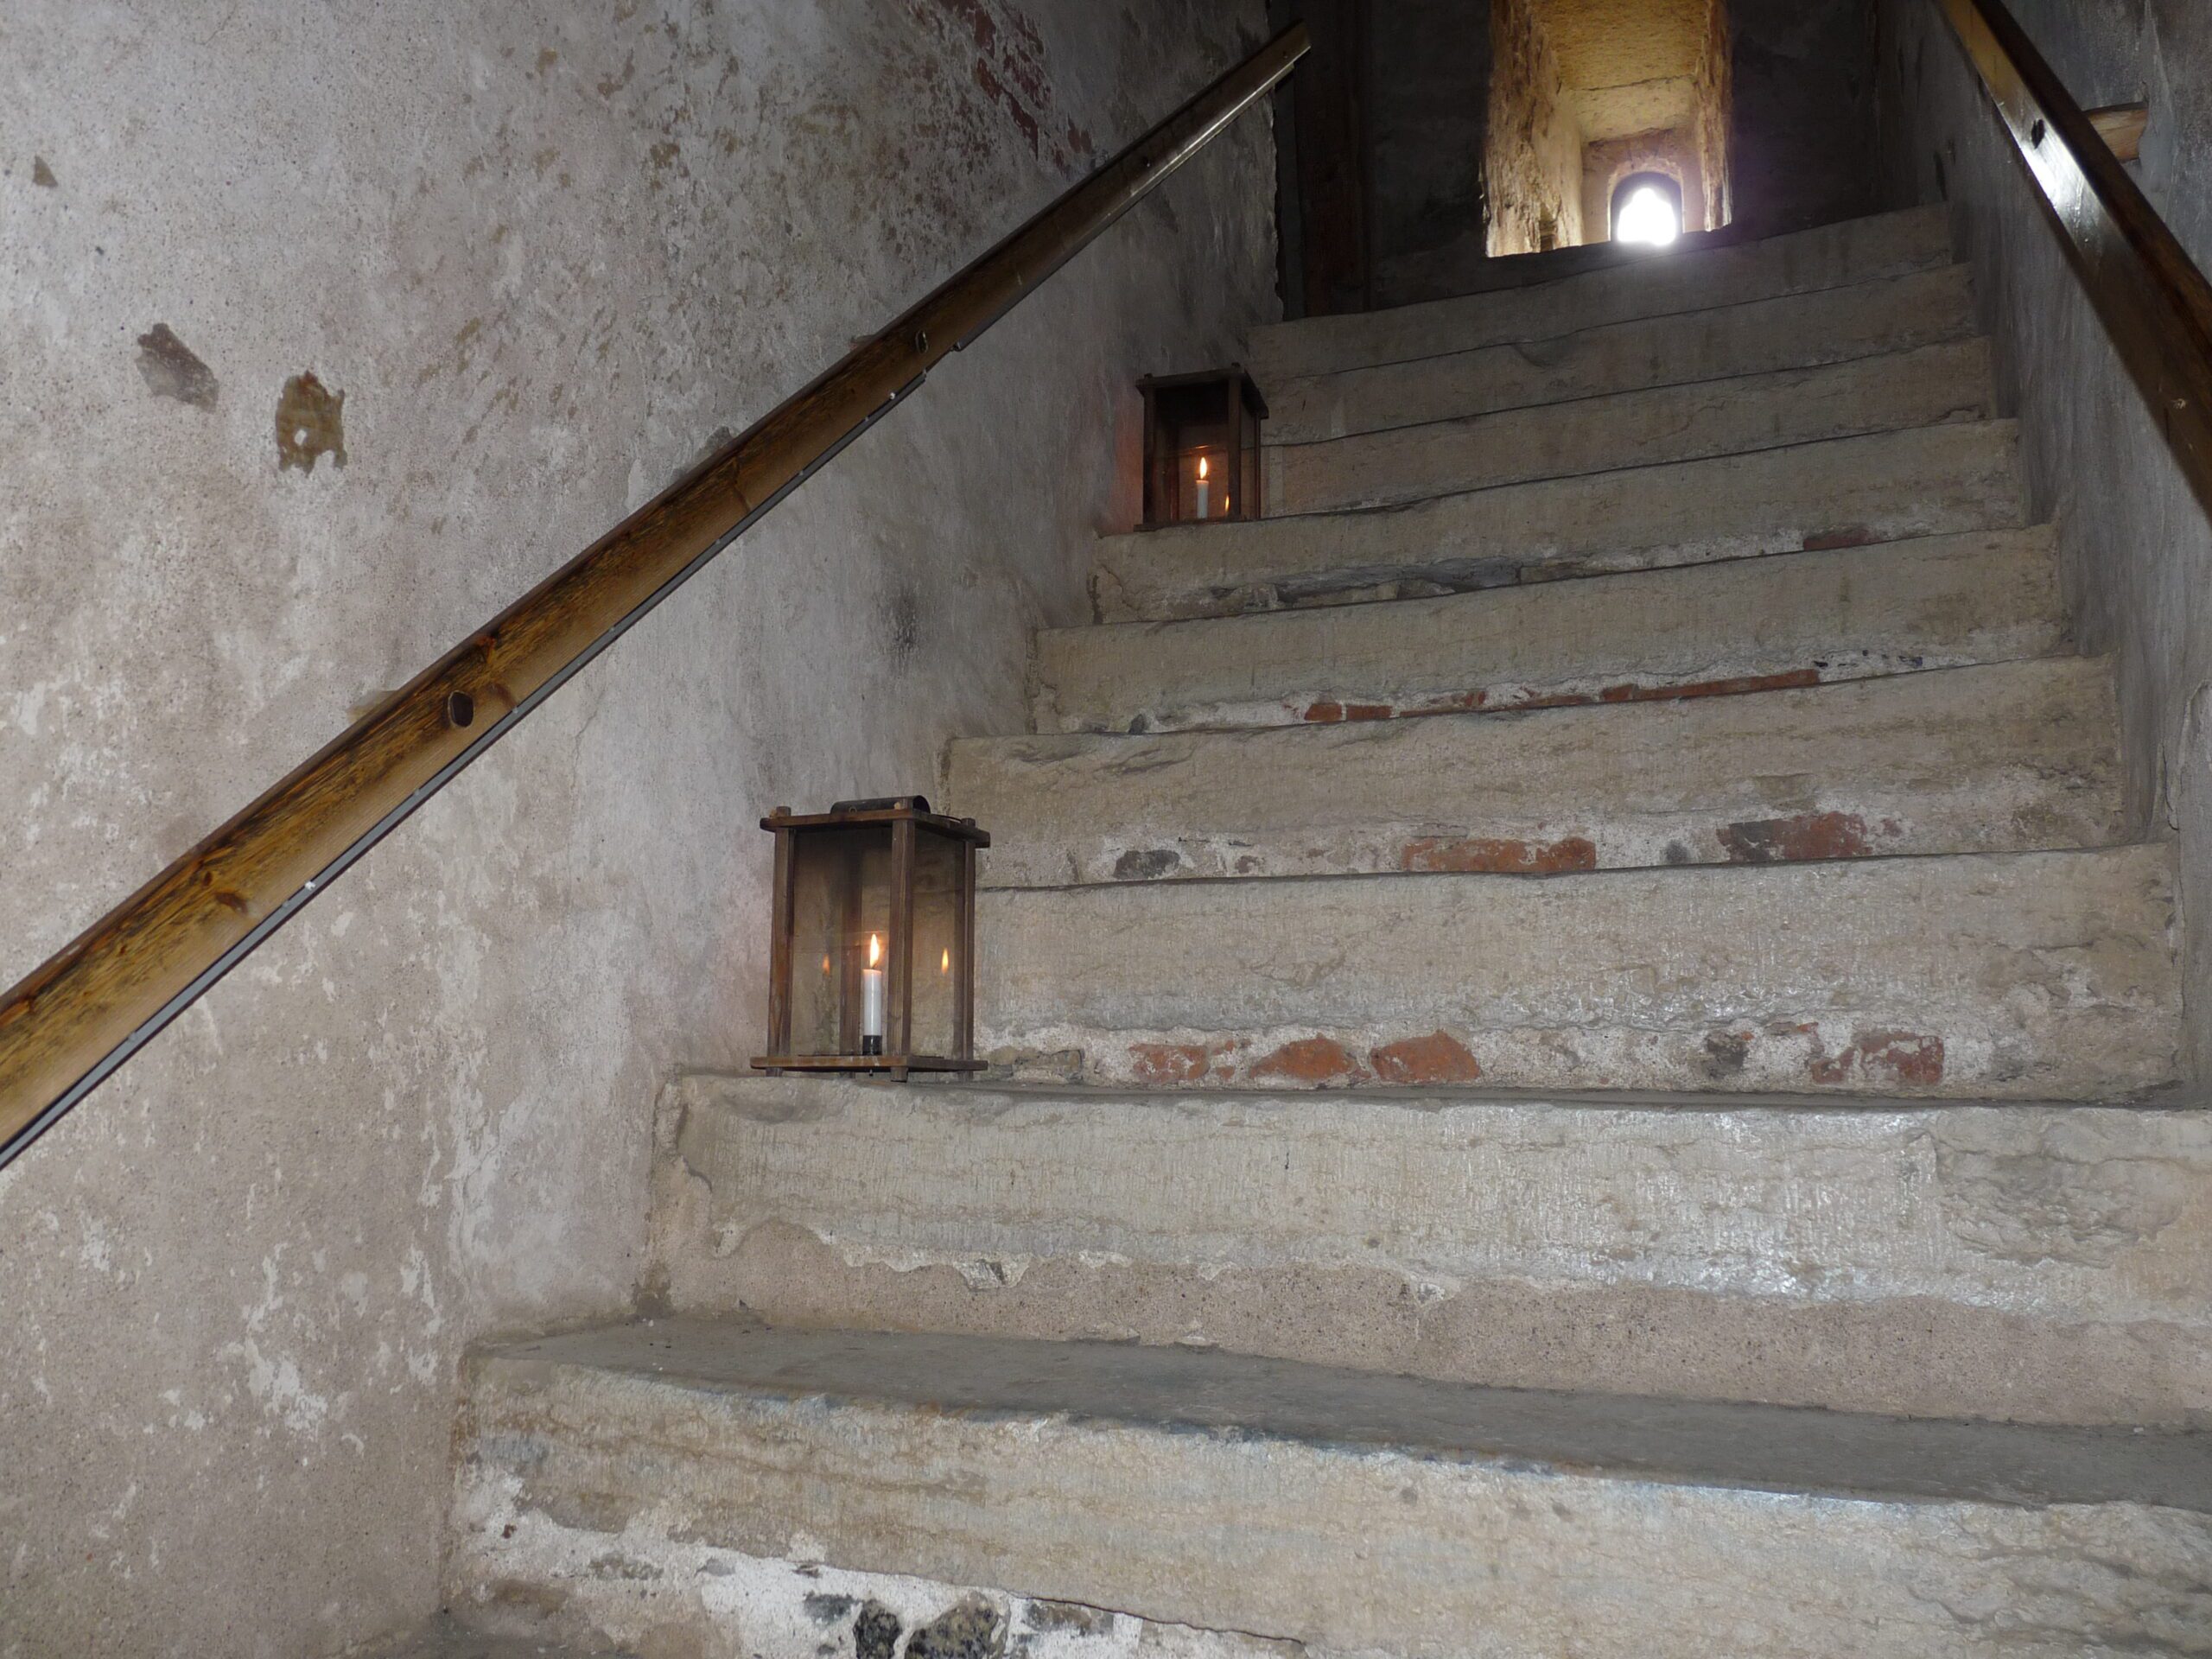 Here you can see the steps between the first and second floors. There is a railing on the wall and there are a couple of lanterns on the stairs.